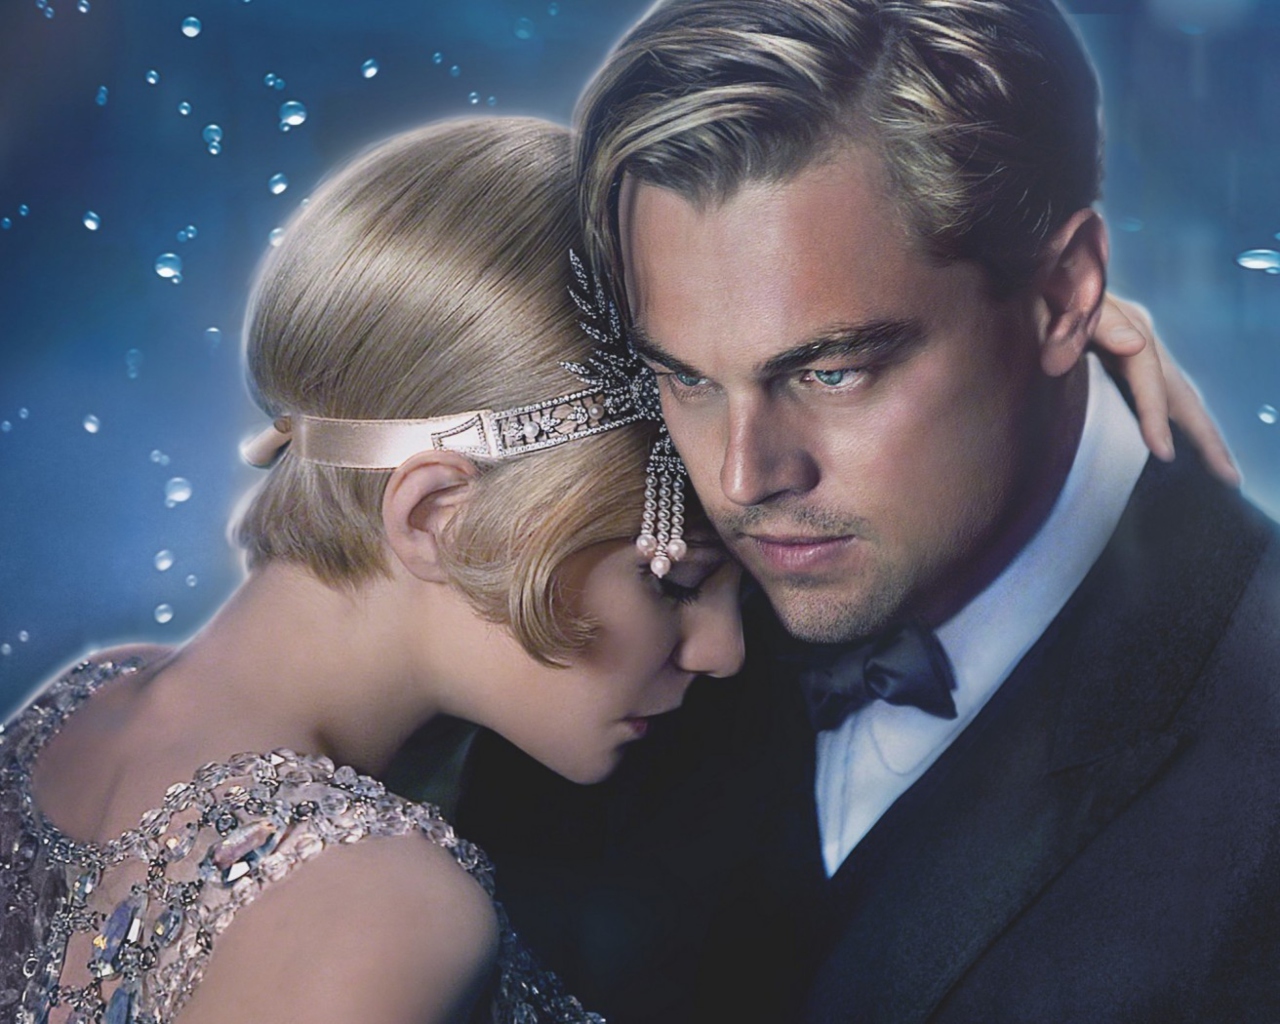 The Great Gatsby wallpaper 1280x1024